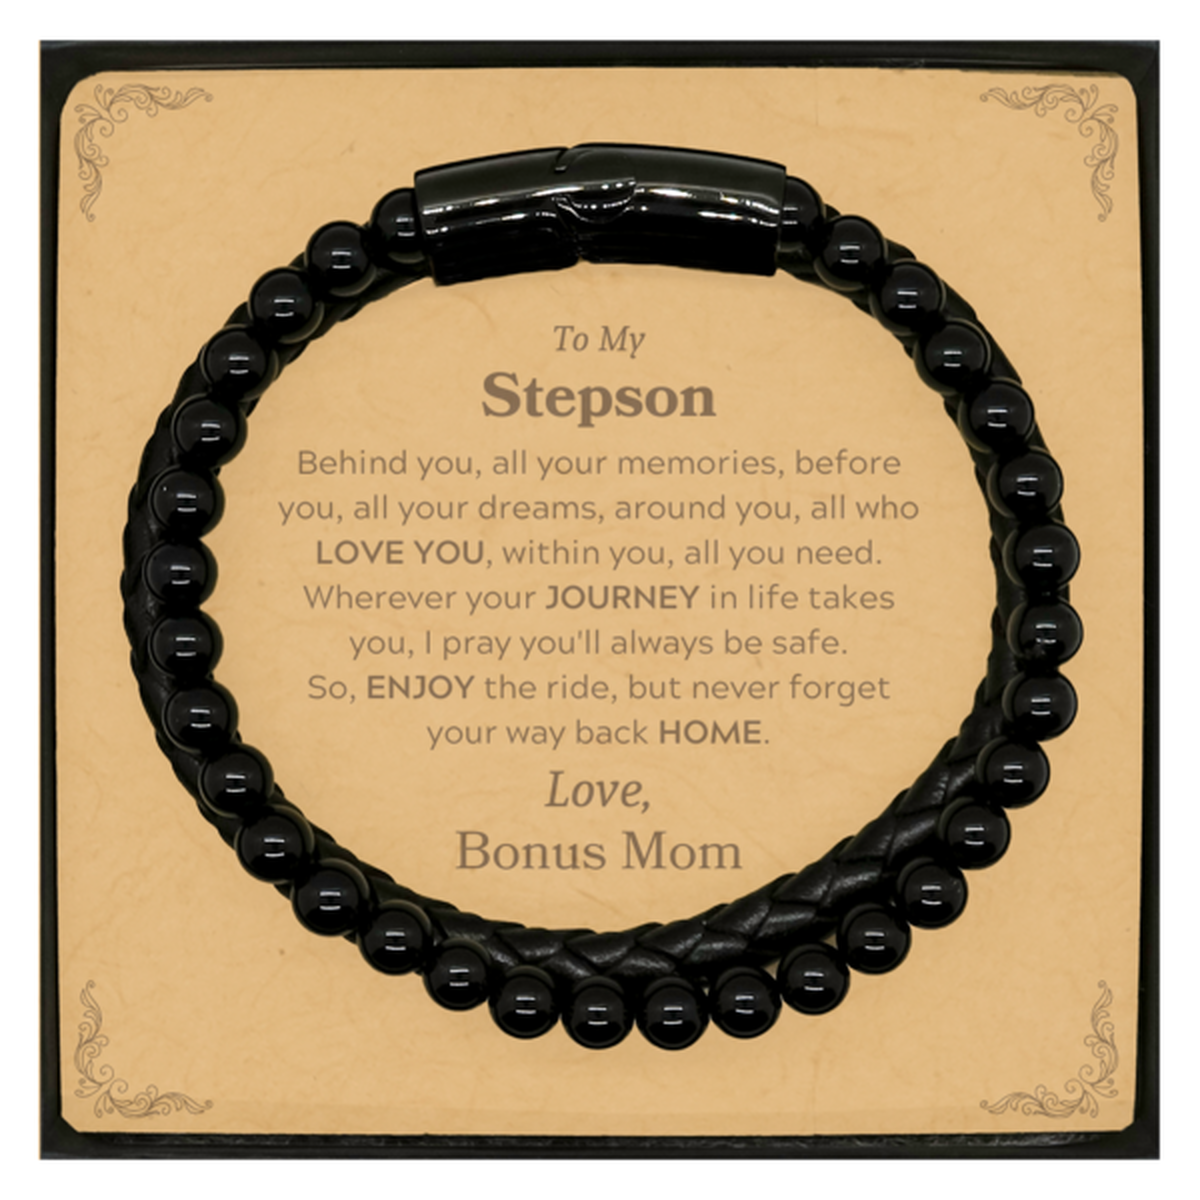 To My Stepson Graduation Gifts from Bonus Mom, Stepson Stone Leather Bracelets Christmas Birthday Gifts for Stepson Behind you, all your memories, before you, all your dreams. Love, Bonus Mom